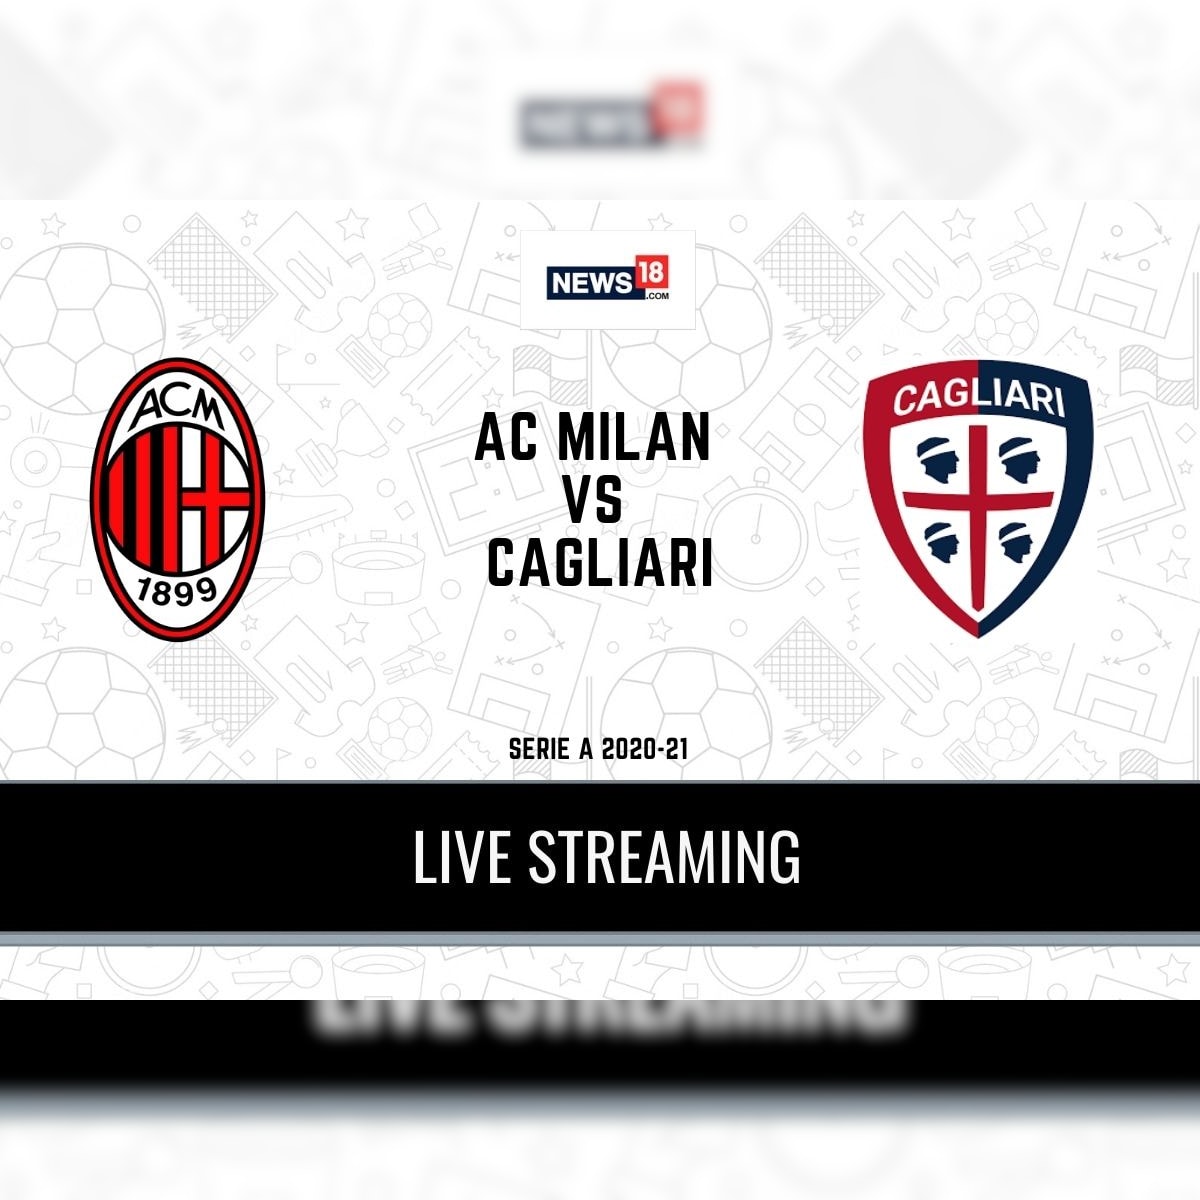 Serie 2020-21 AC Milan vs Cagliari LIVE Streaming: When to Watch Online, TV Telecast, Team News